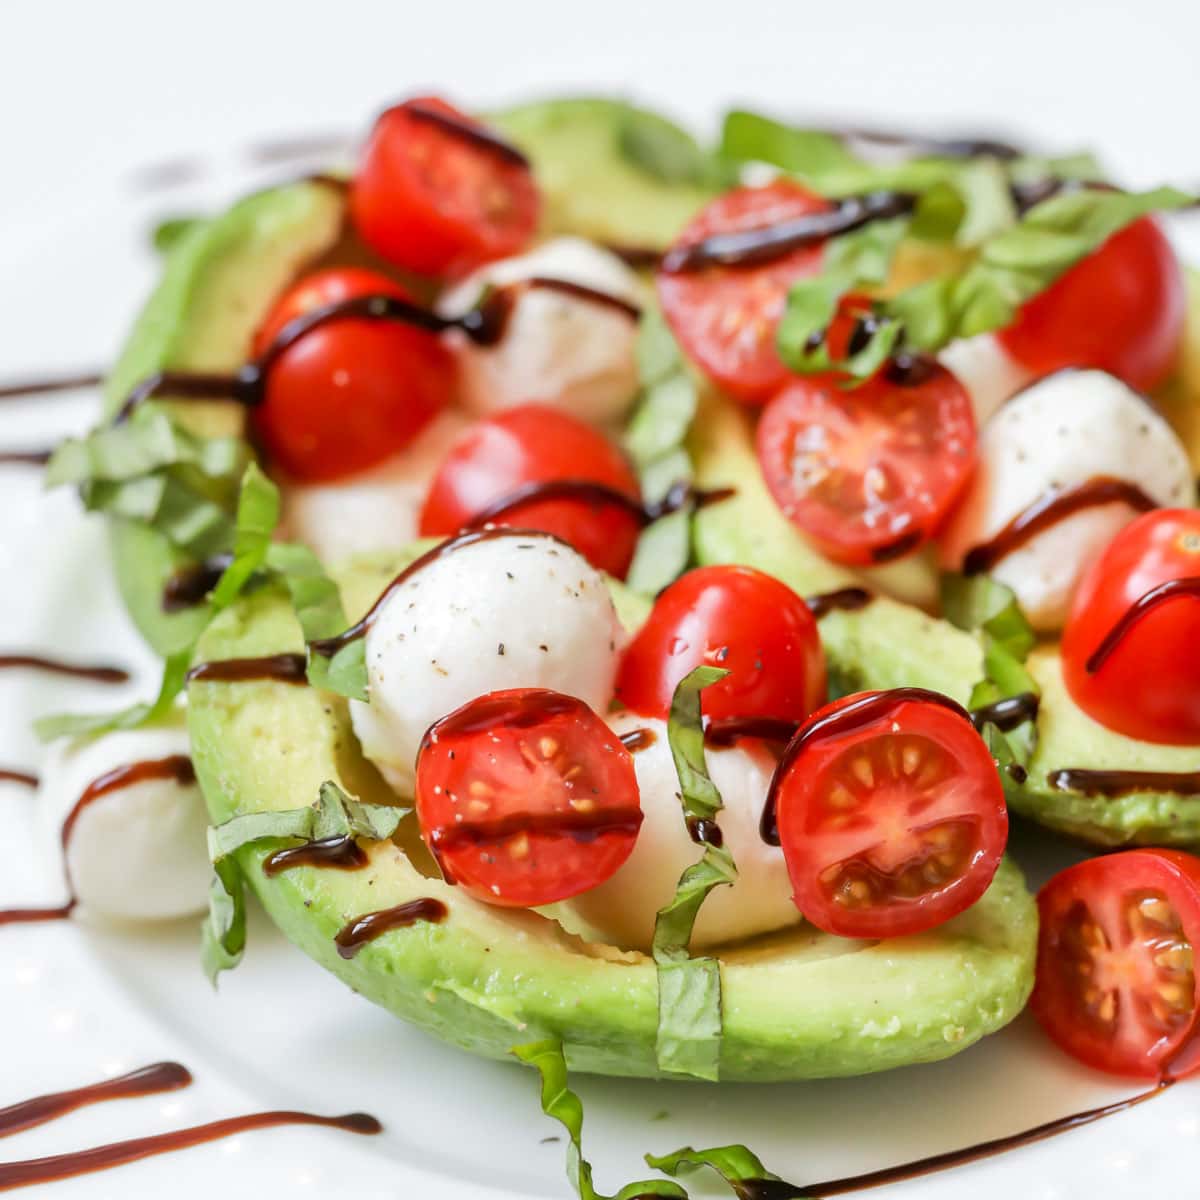 Caprese Avocados topped with tomatoes, mozzarella, basil, and balsamic